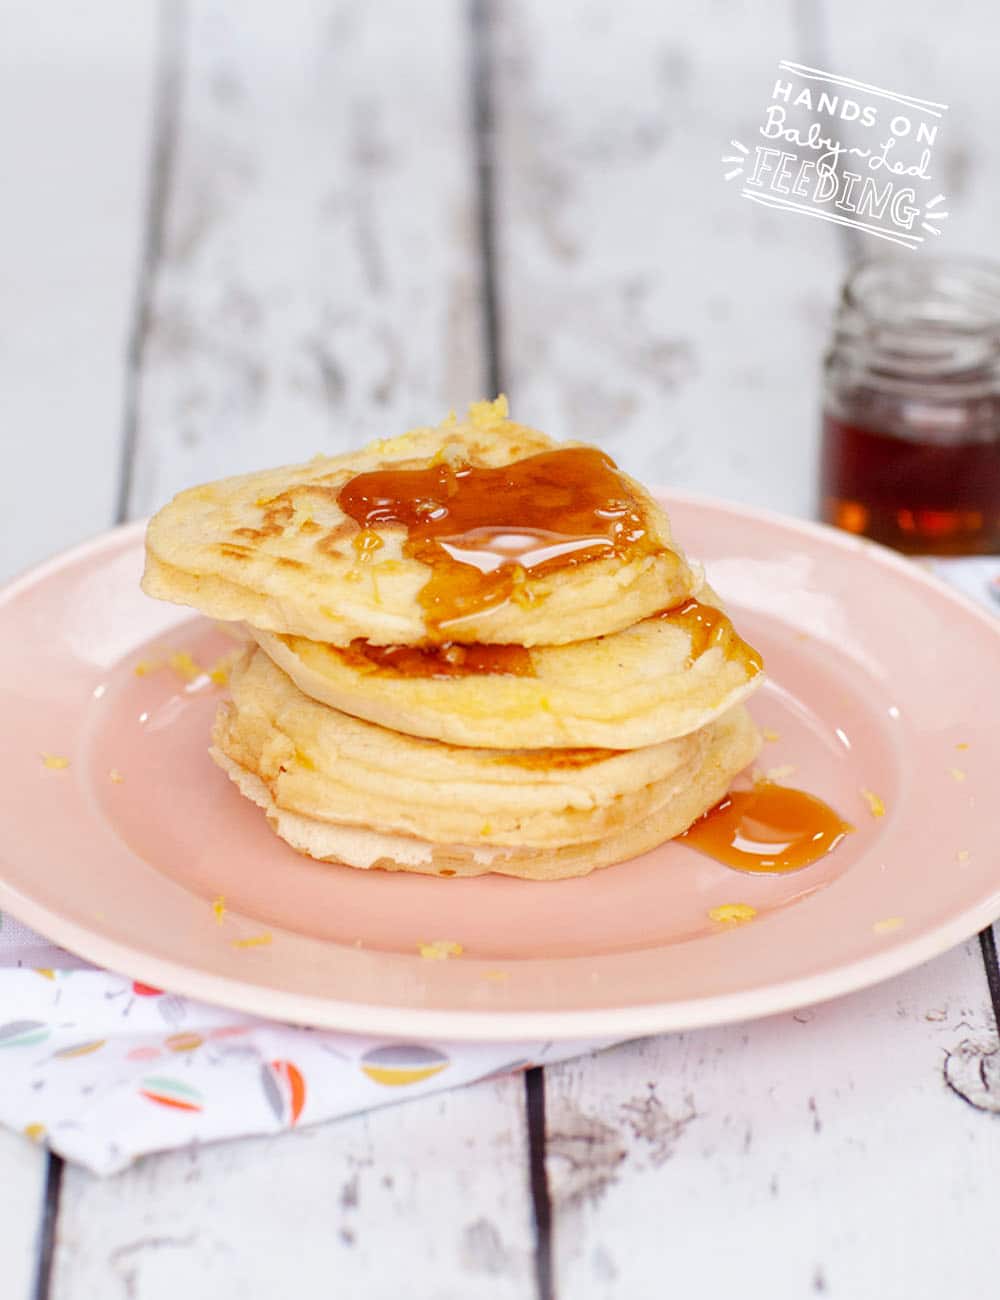 Zesty lemon and sweet maple syrup are the perfect combination in this super easy healthy baby led weaning pancake! This refined sugar free finger food can be made ahead and frozen for a quick breakfast idea on busy days. #pancakes #babyledweaning #pancakerecipe #breakfastrecipe #fingerfood #freezerfood